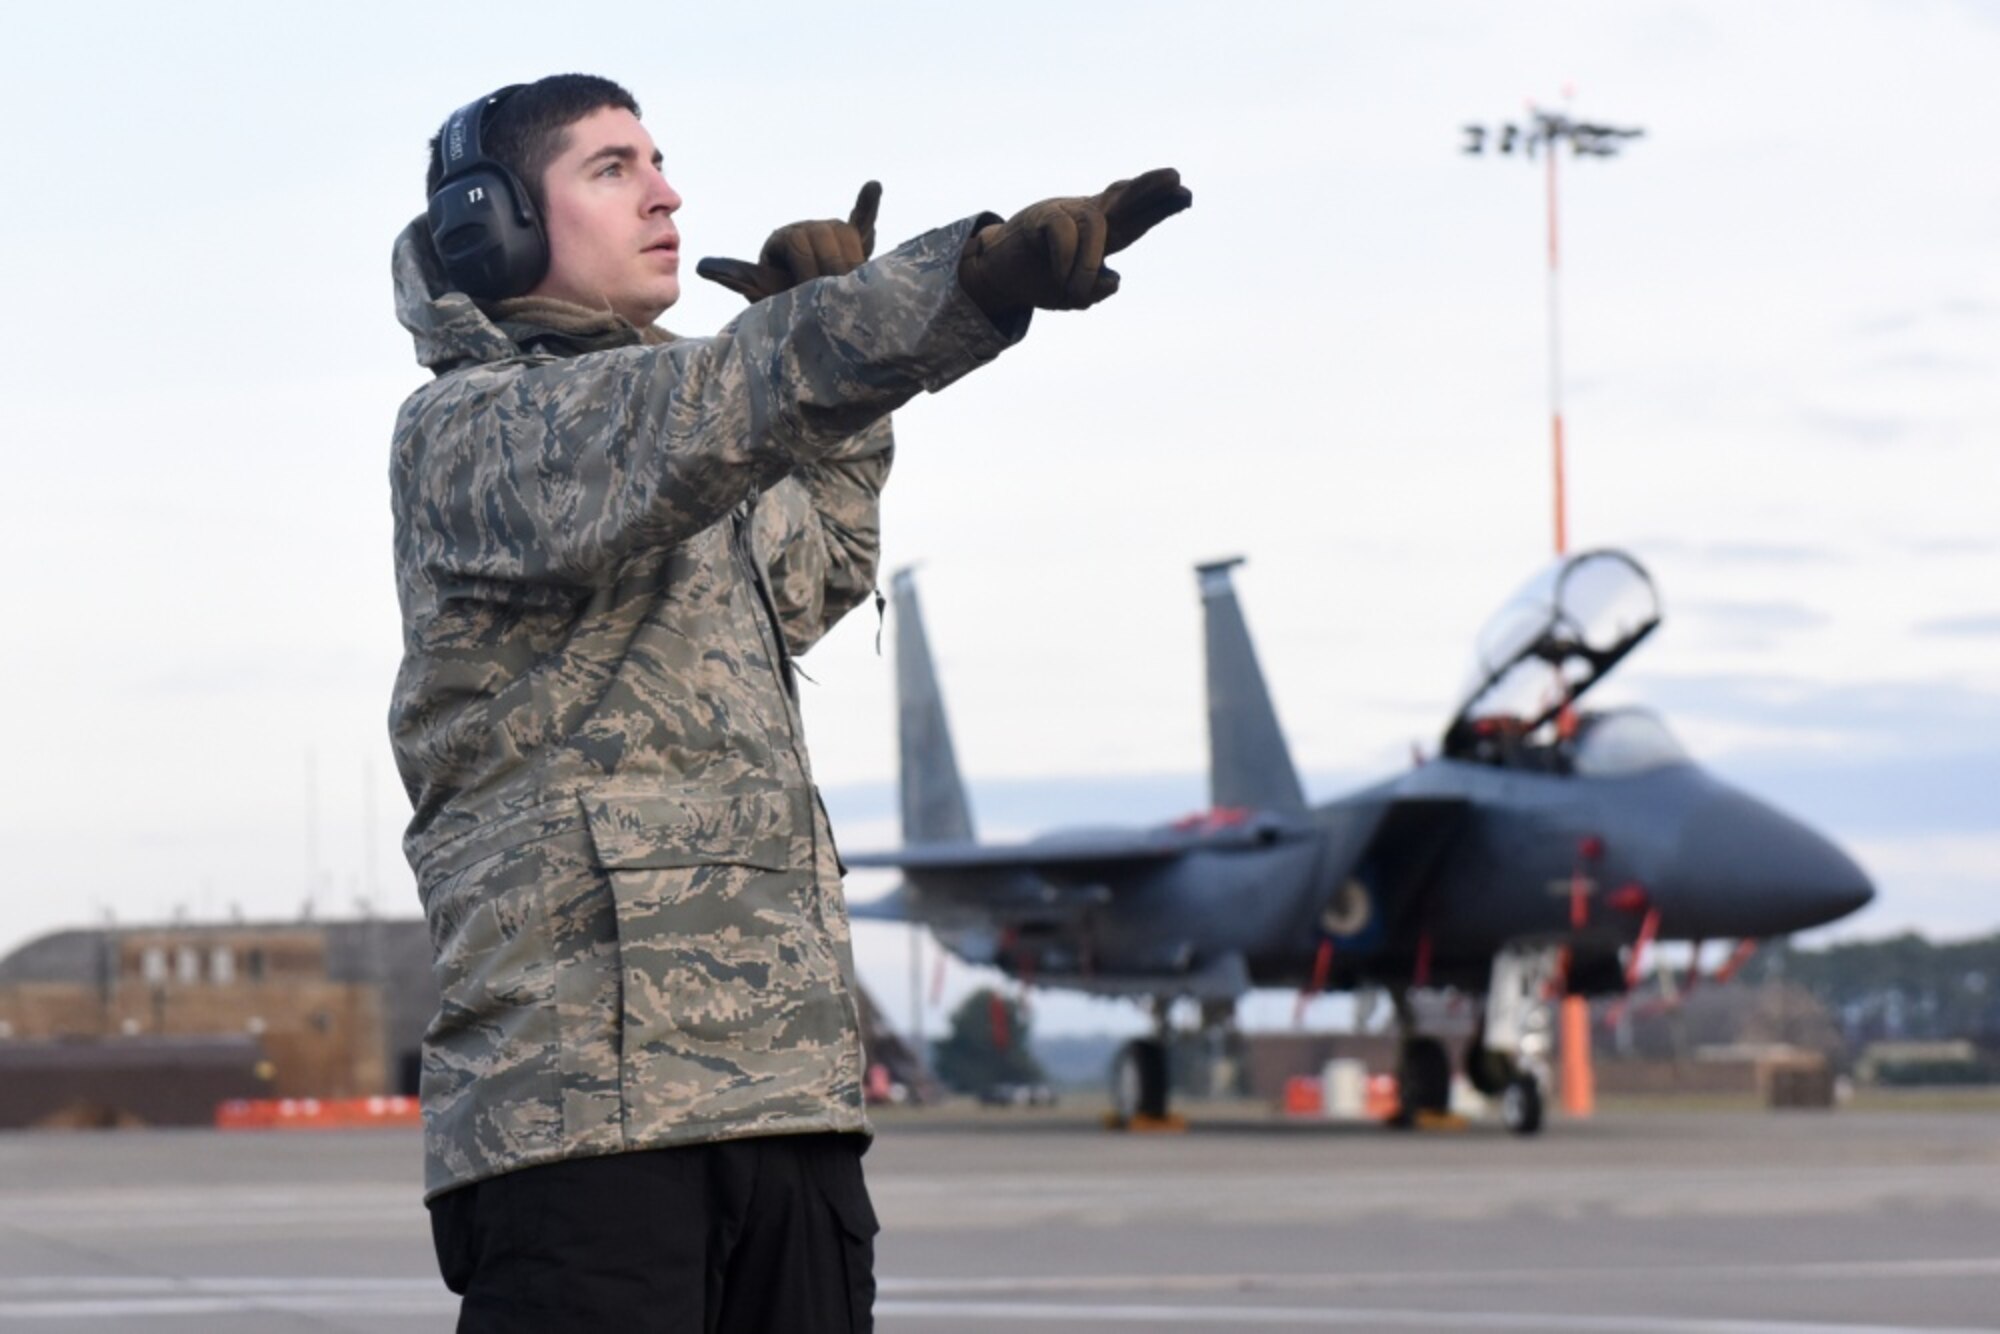 U.S. Air Force Reserve Airmen assigned to the 414th Fighter Group at Seymour Johnson Air Force Base, N.C., participated in their annual training Nov. 9 – 23, 2019 here.